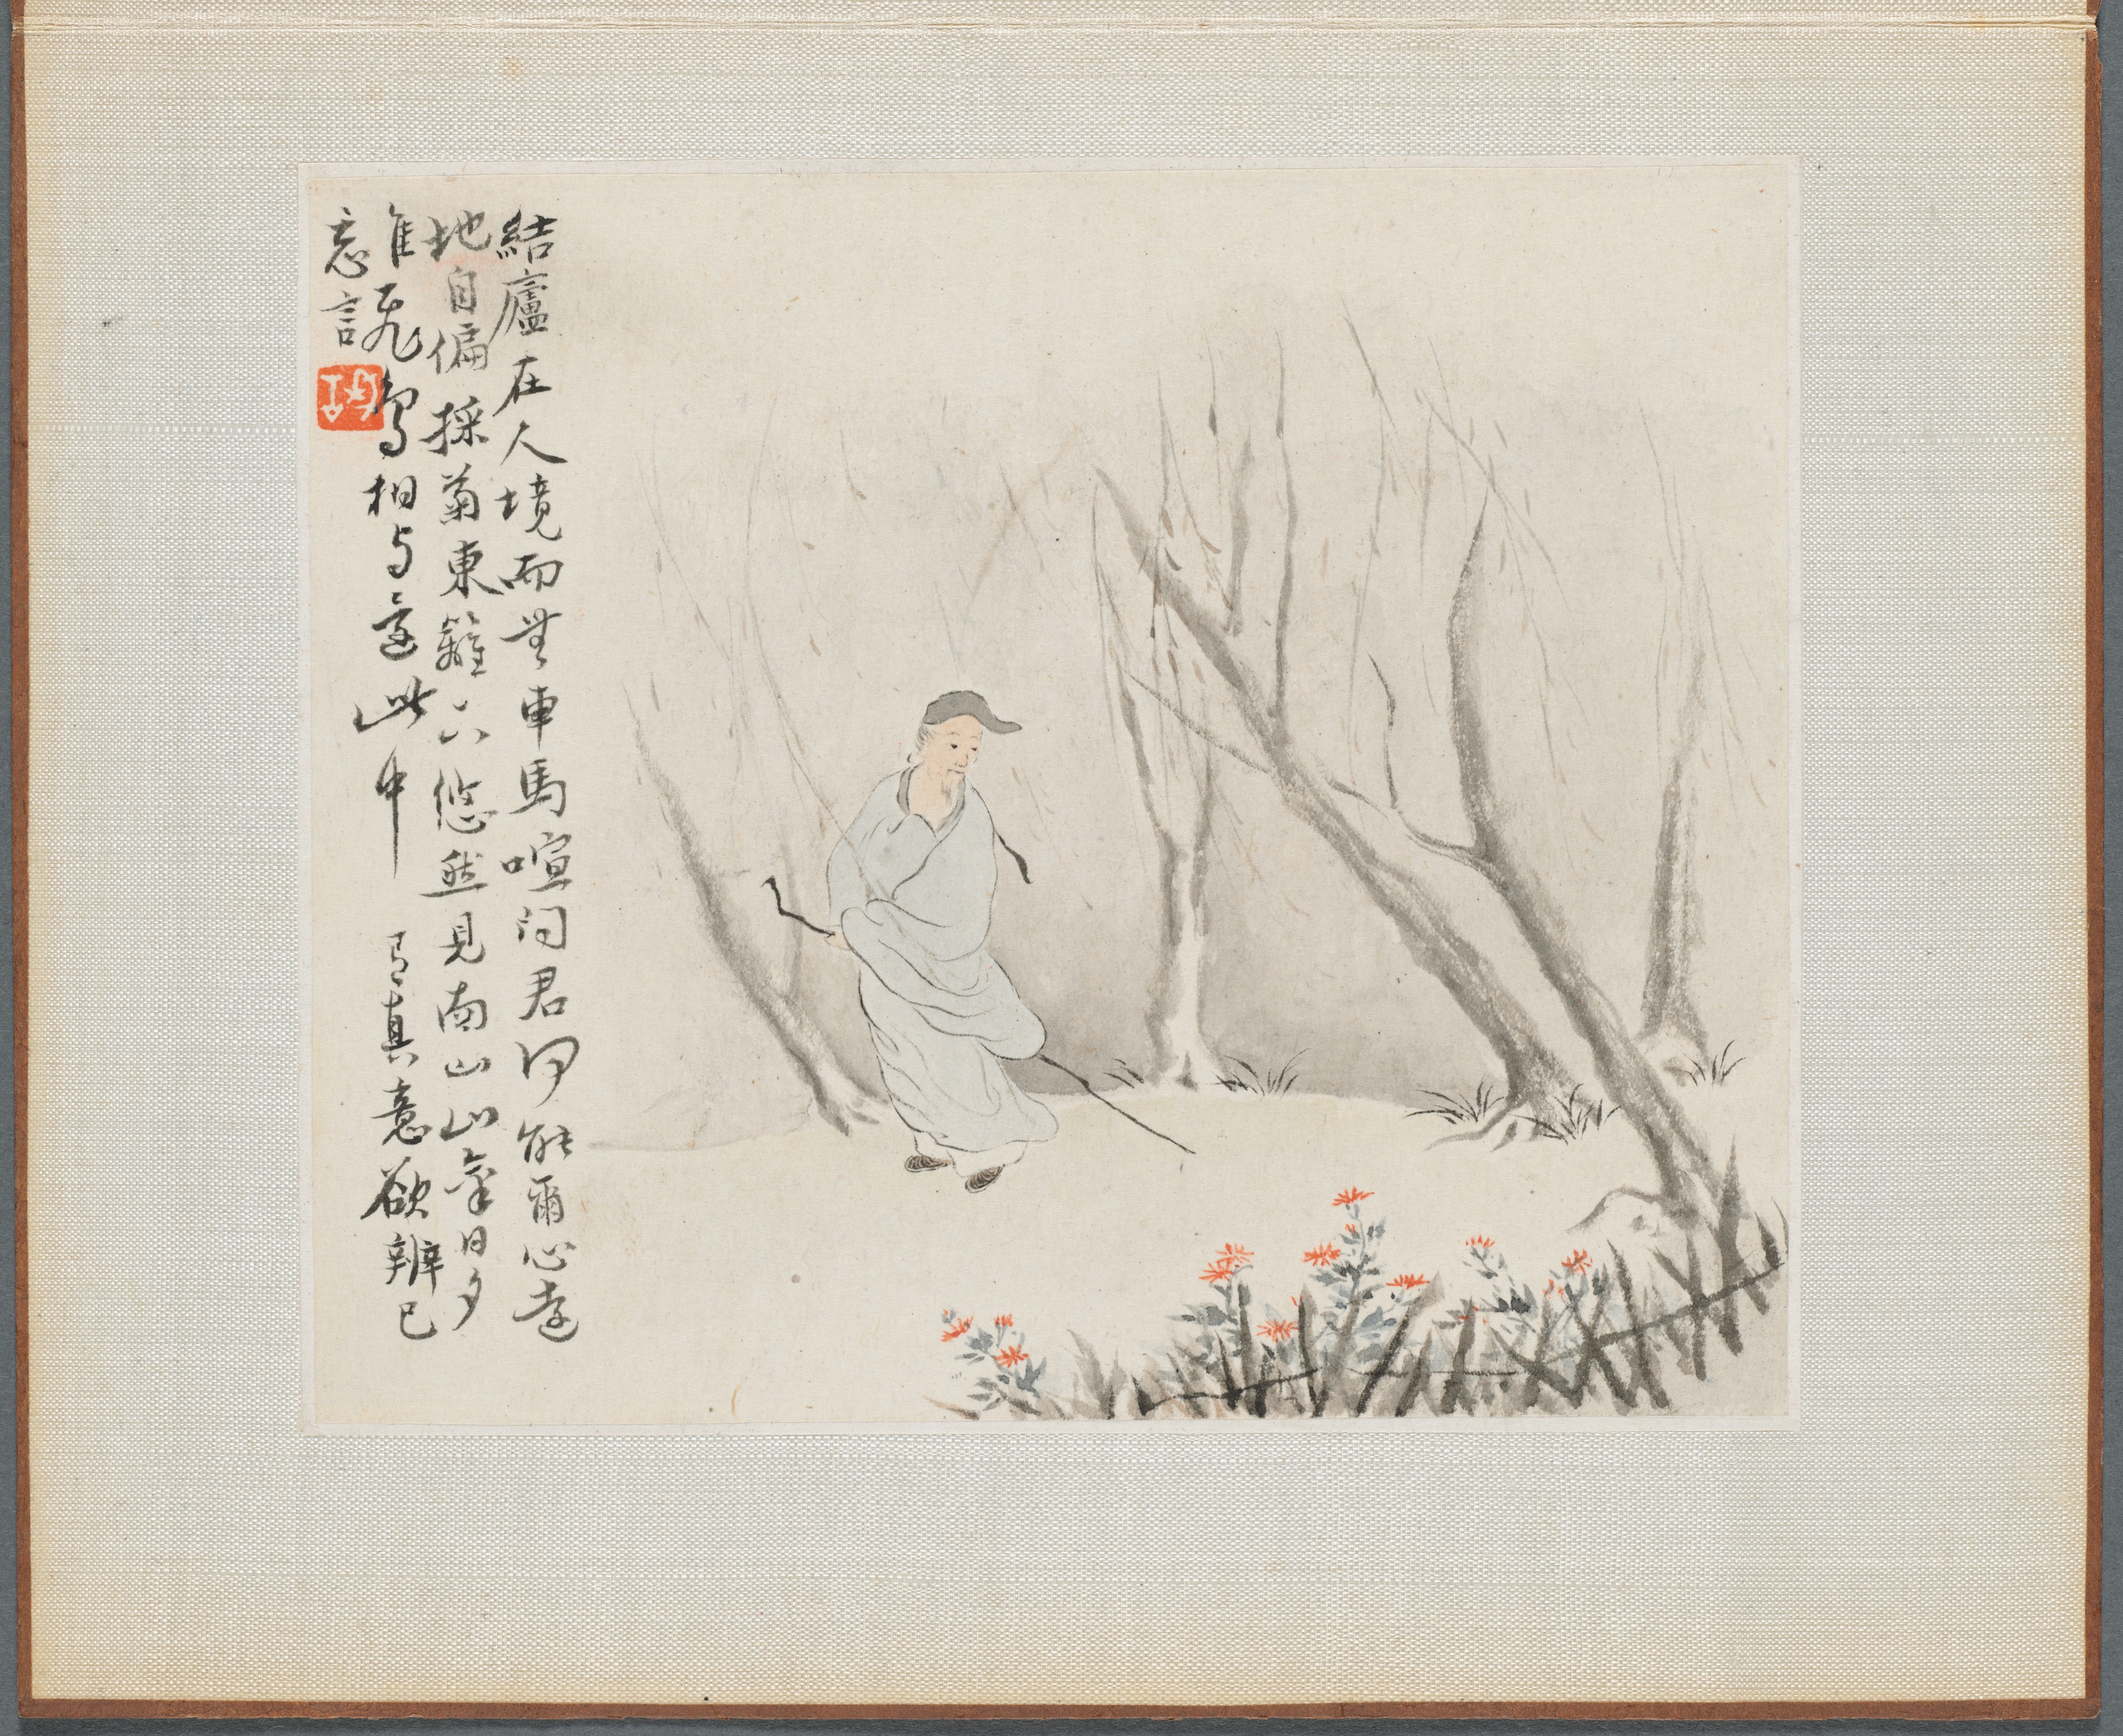 Album of Landscape Paintings Illustrating Old Poems:  Man with a Staff Admires Chrysanthemums at a Fence